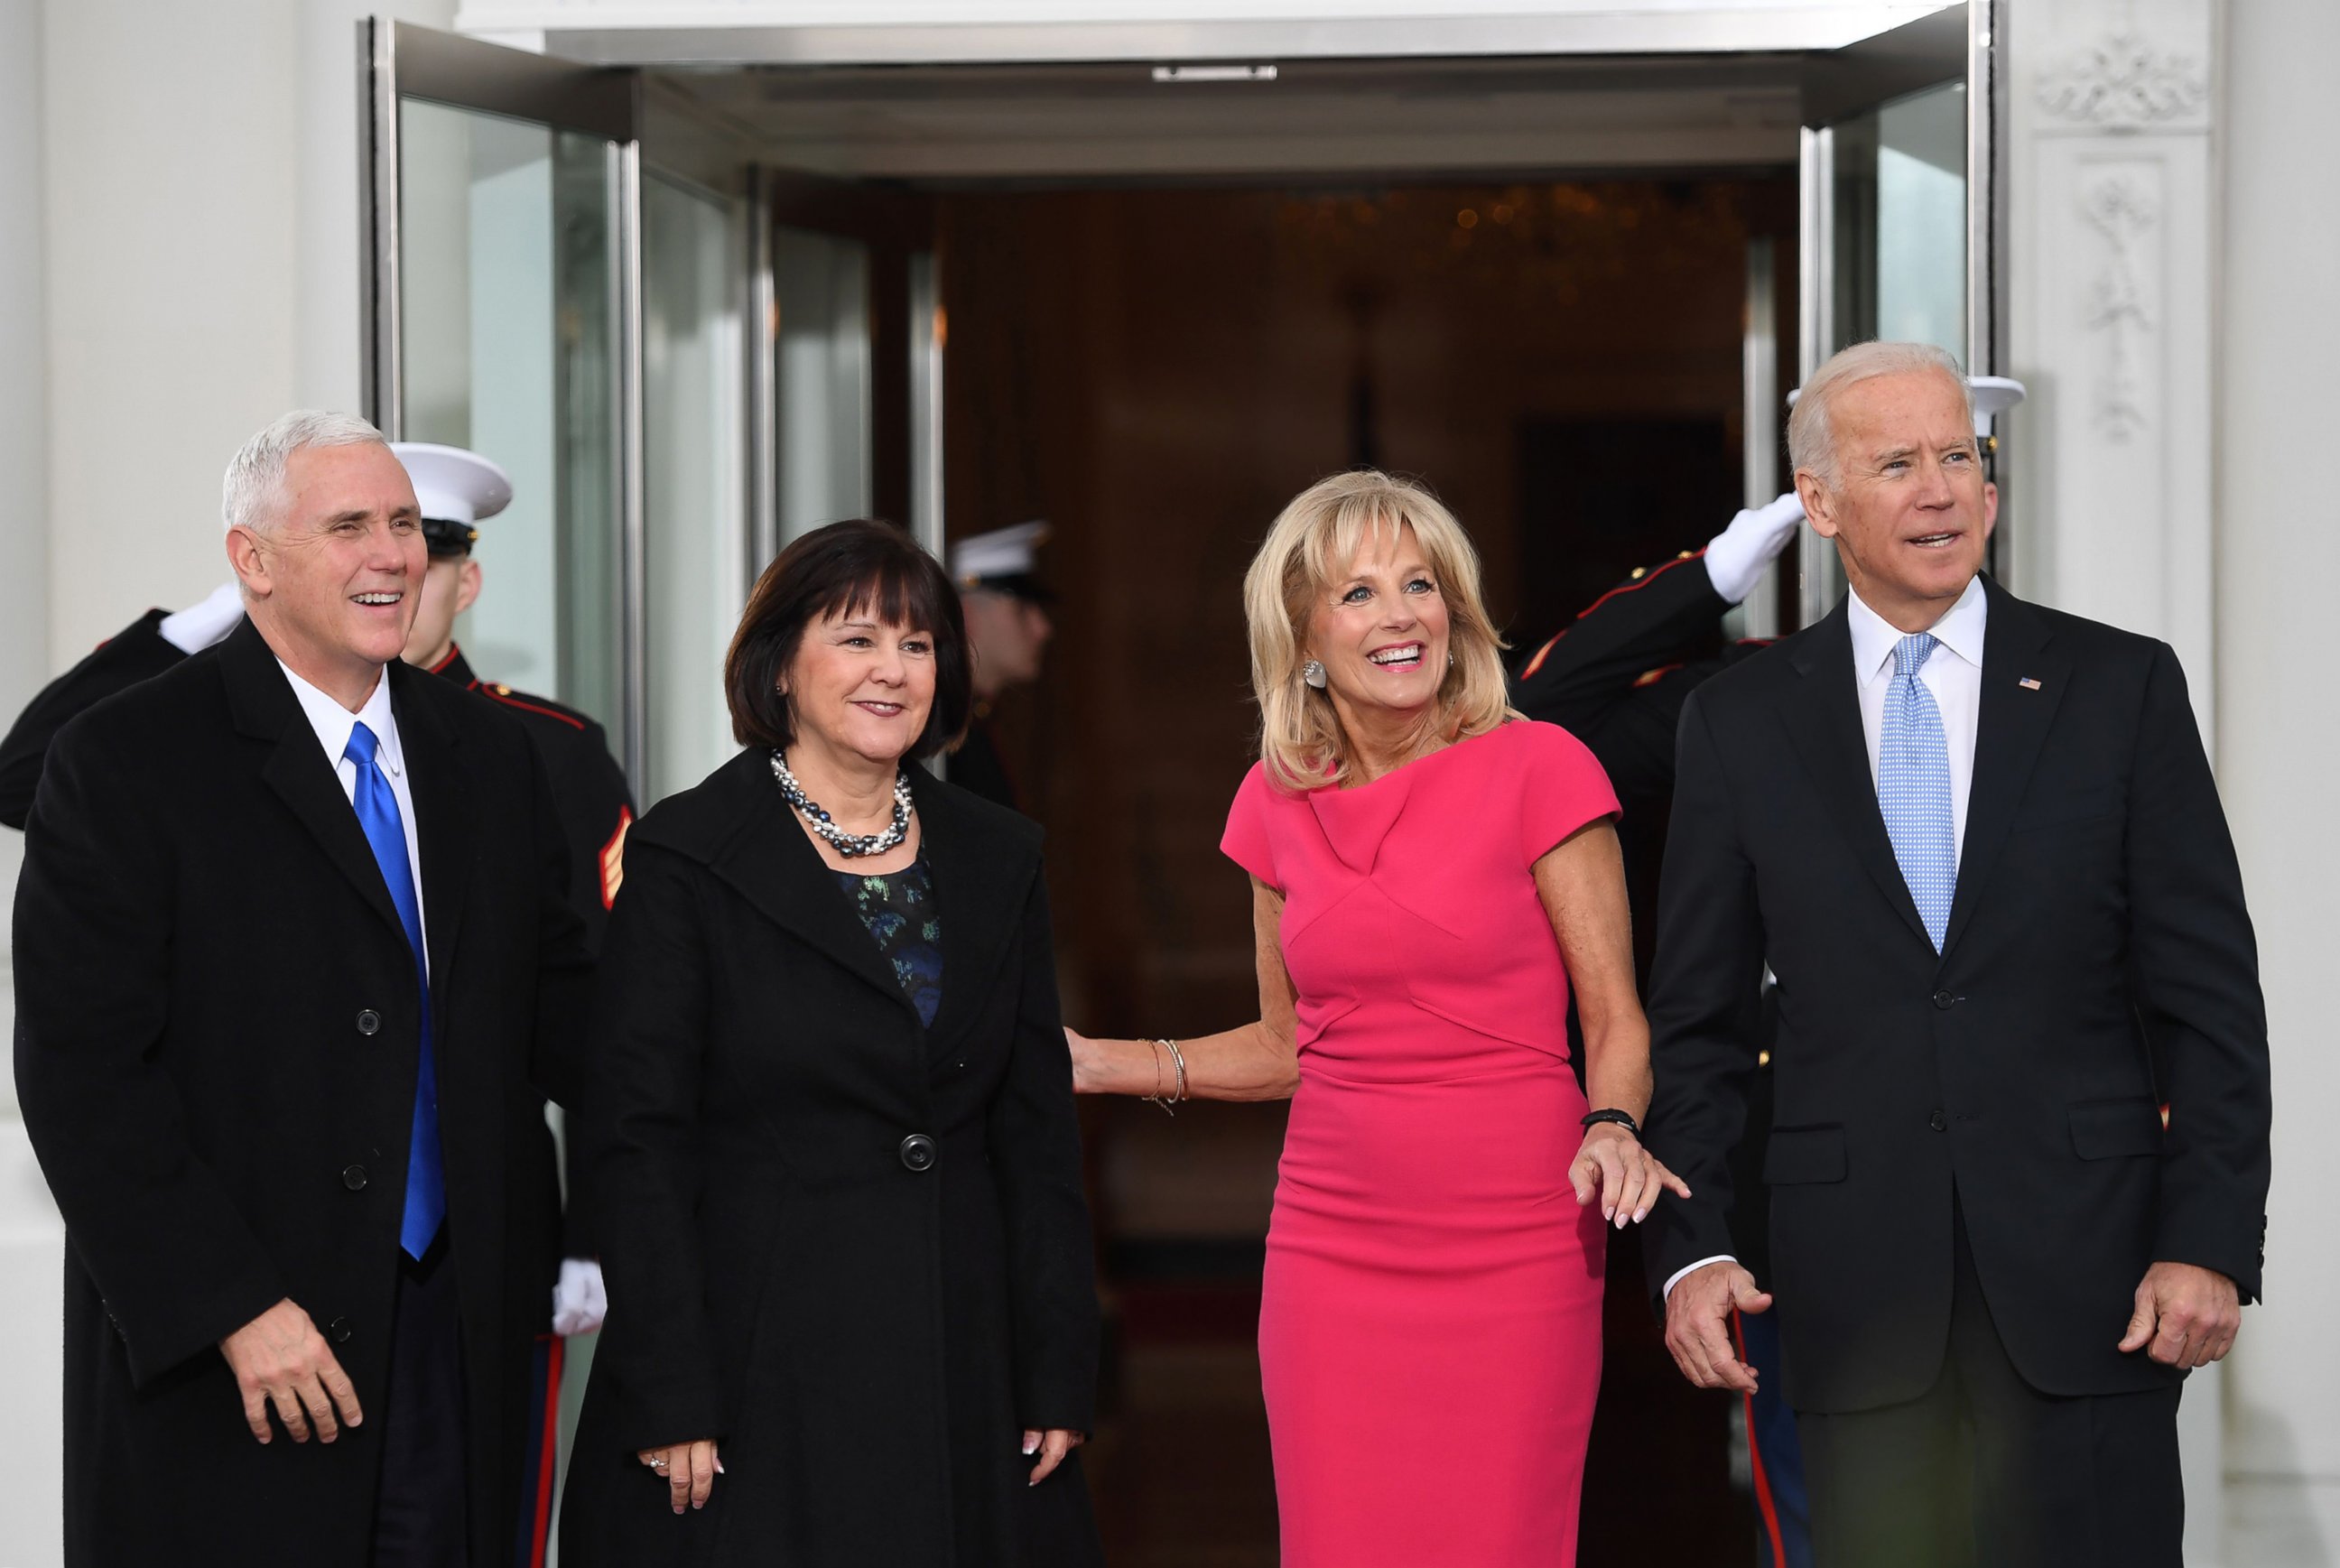 PHOTO: Vice President Joe Biden and his wife Dr. Jill Biden, welcome Vice President-elect Mike Pence and his wife Karen to the White House before the inauguration ceremony, Jan. 20, 2017. 